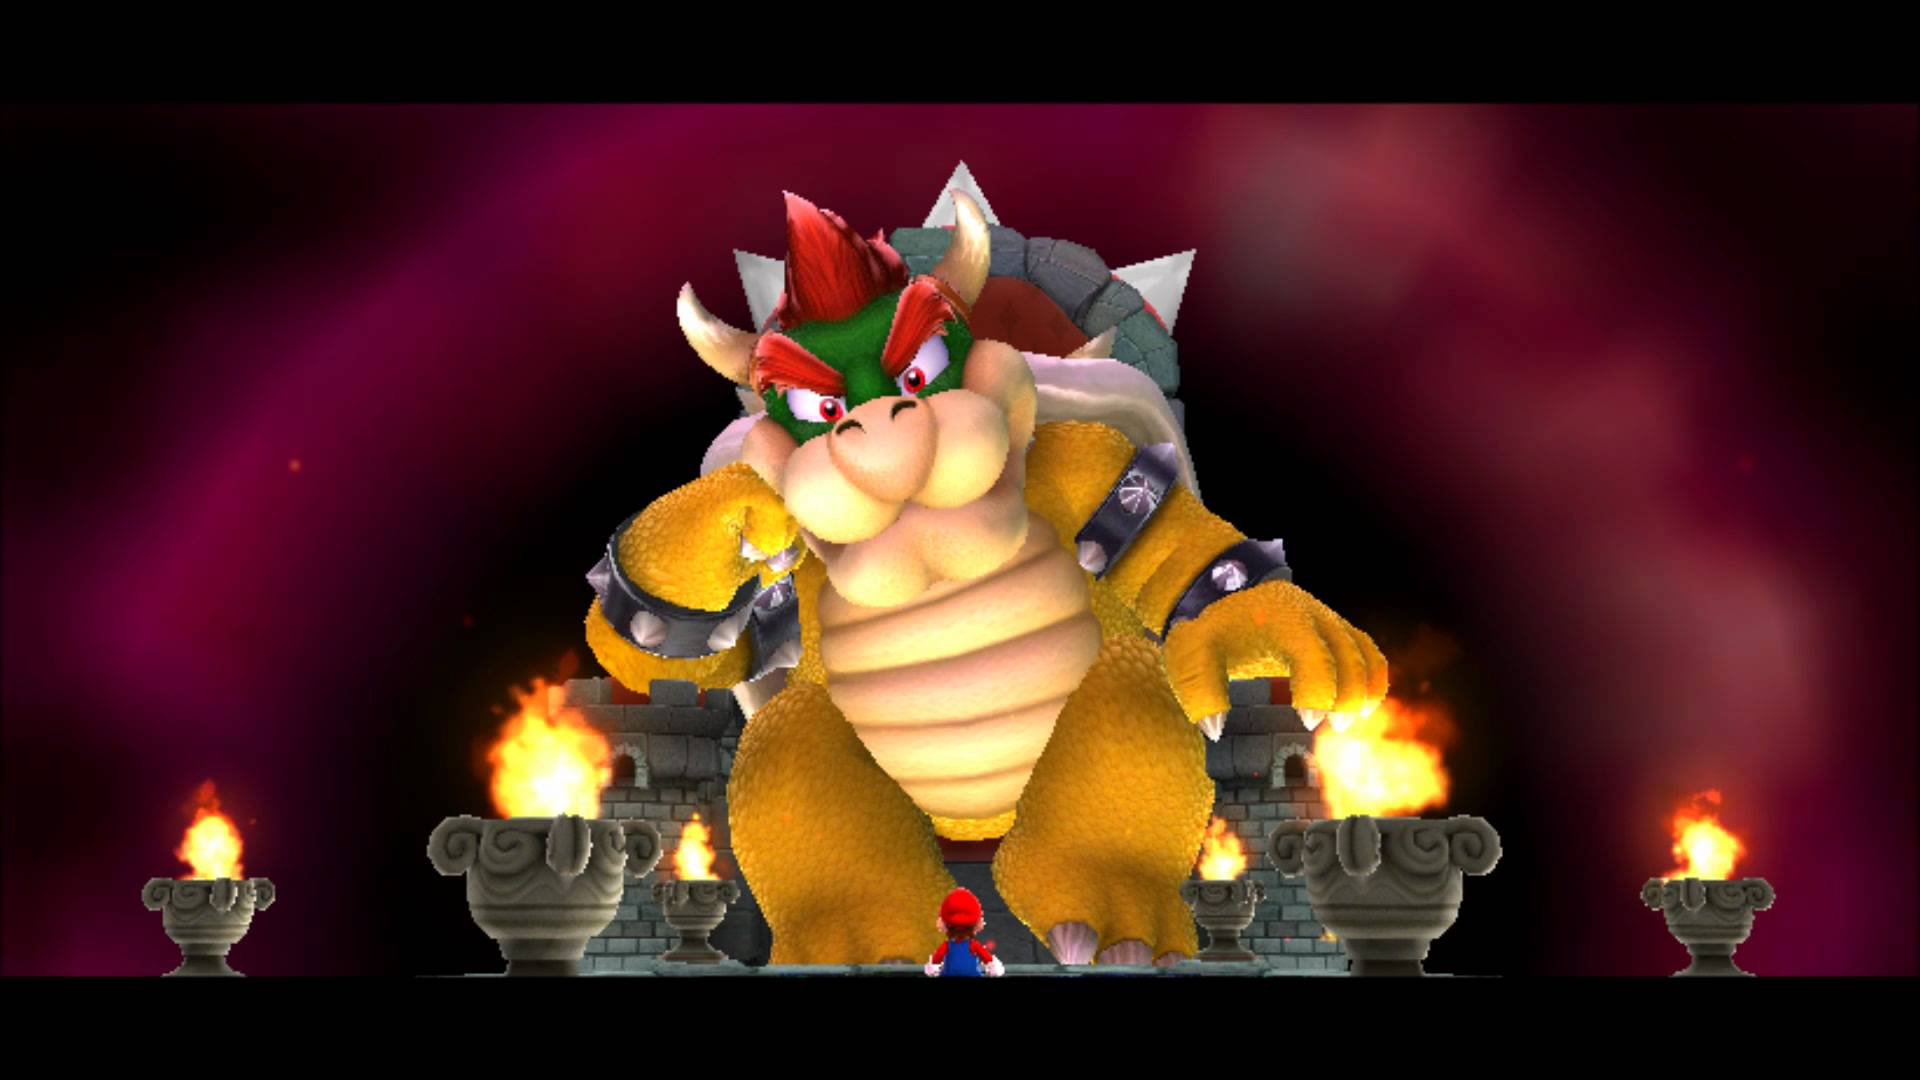 Anarchy In The Galaxy: 25 Days of Villains - #14: Bowser